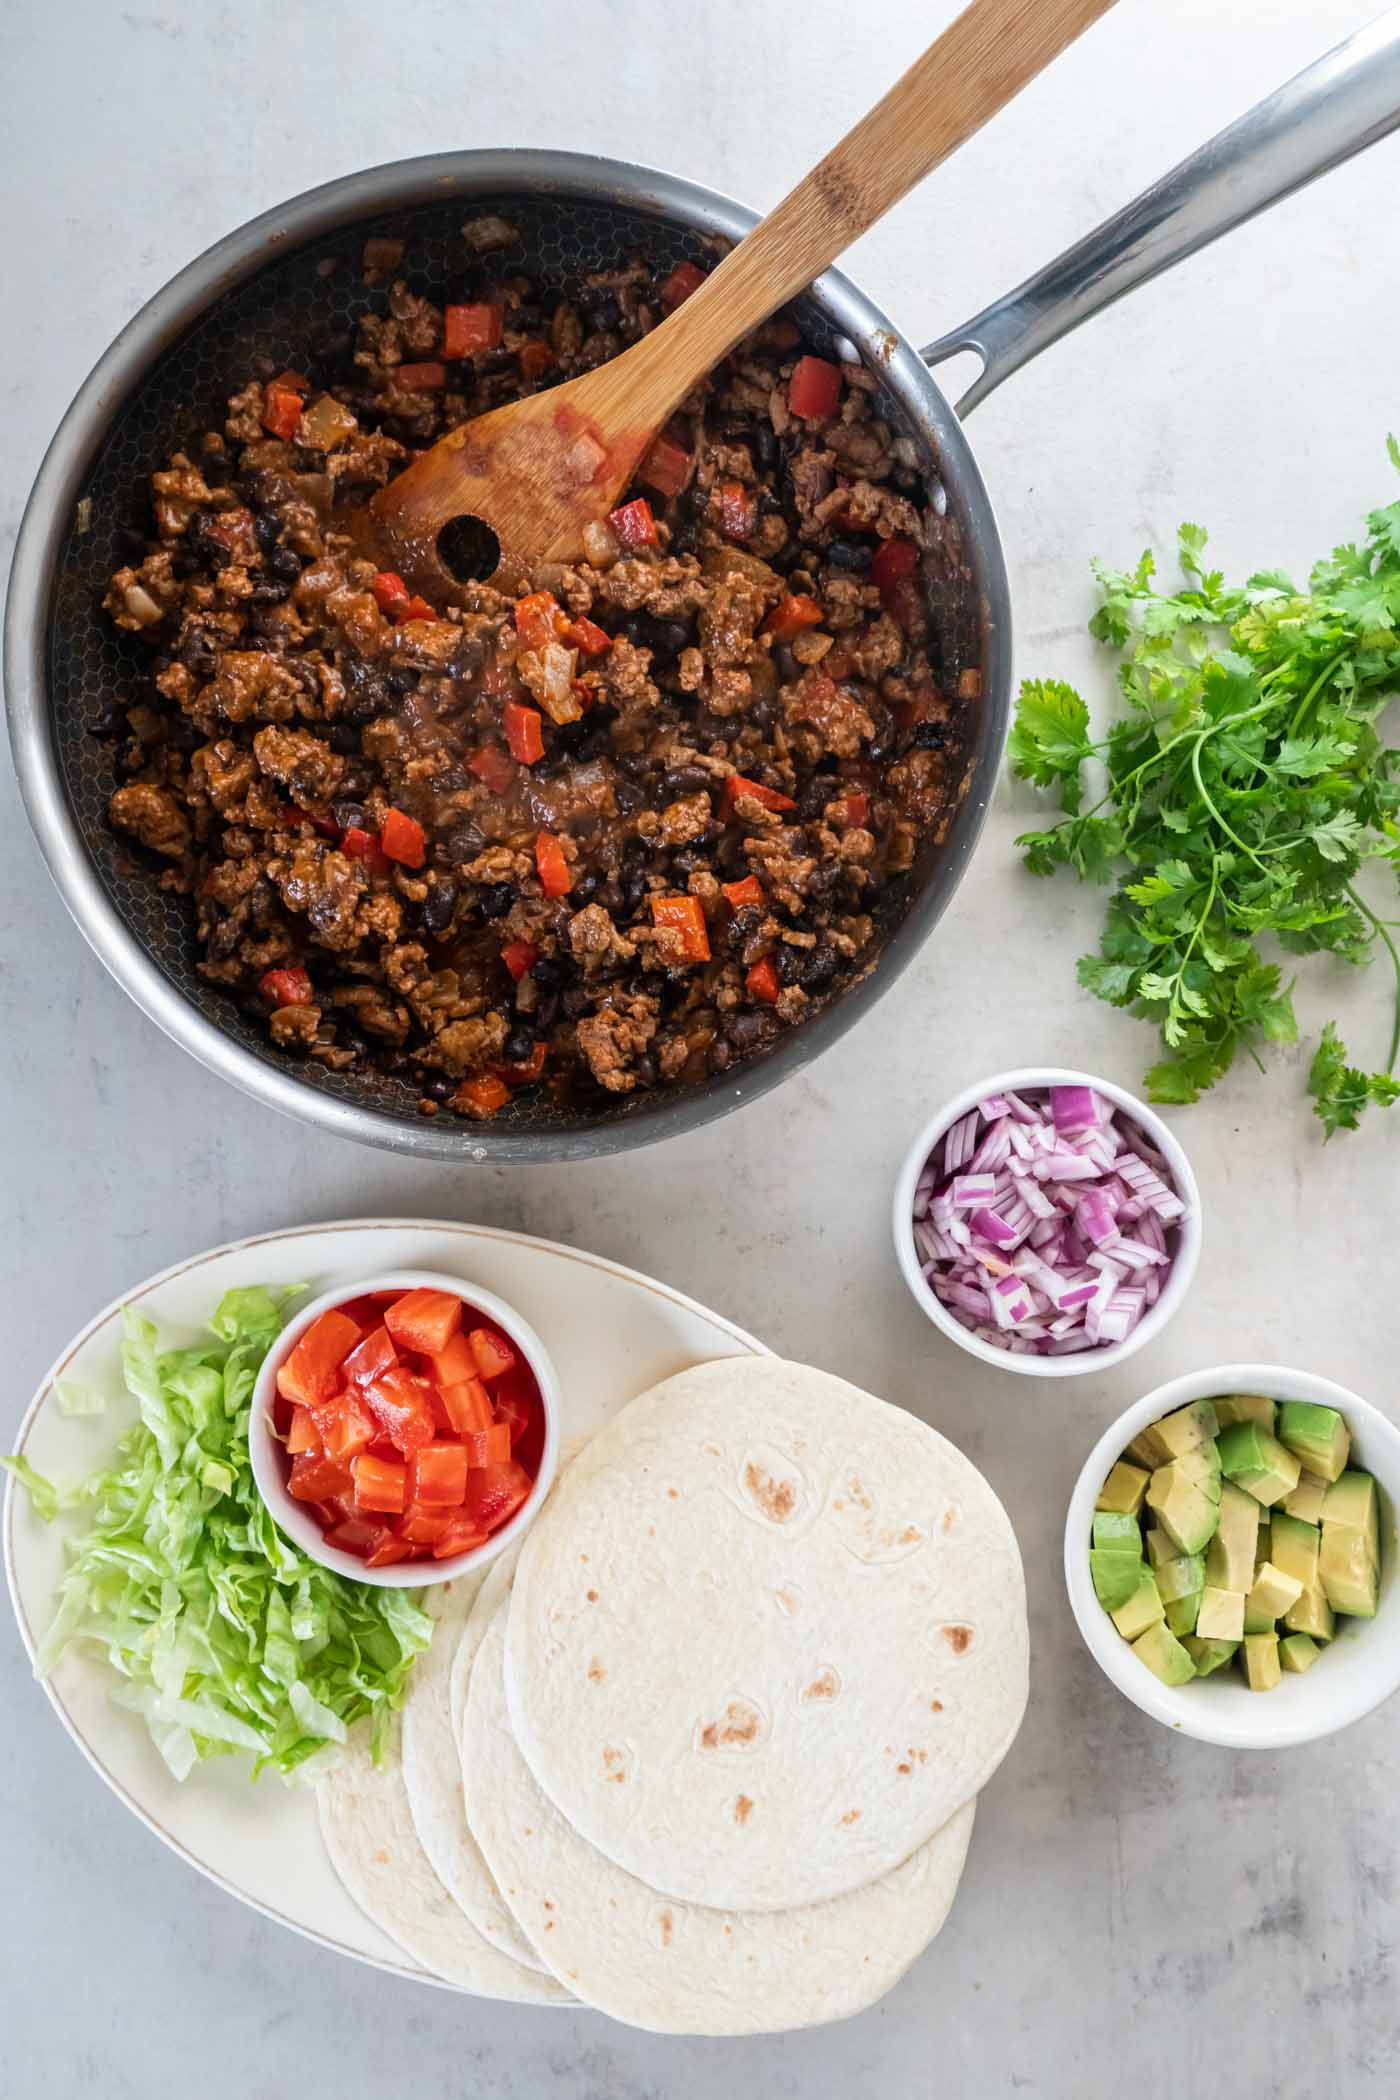 Turkey taco filling, tortillas and taco toppings.